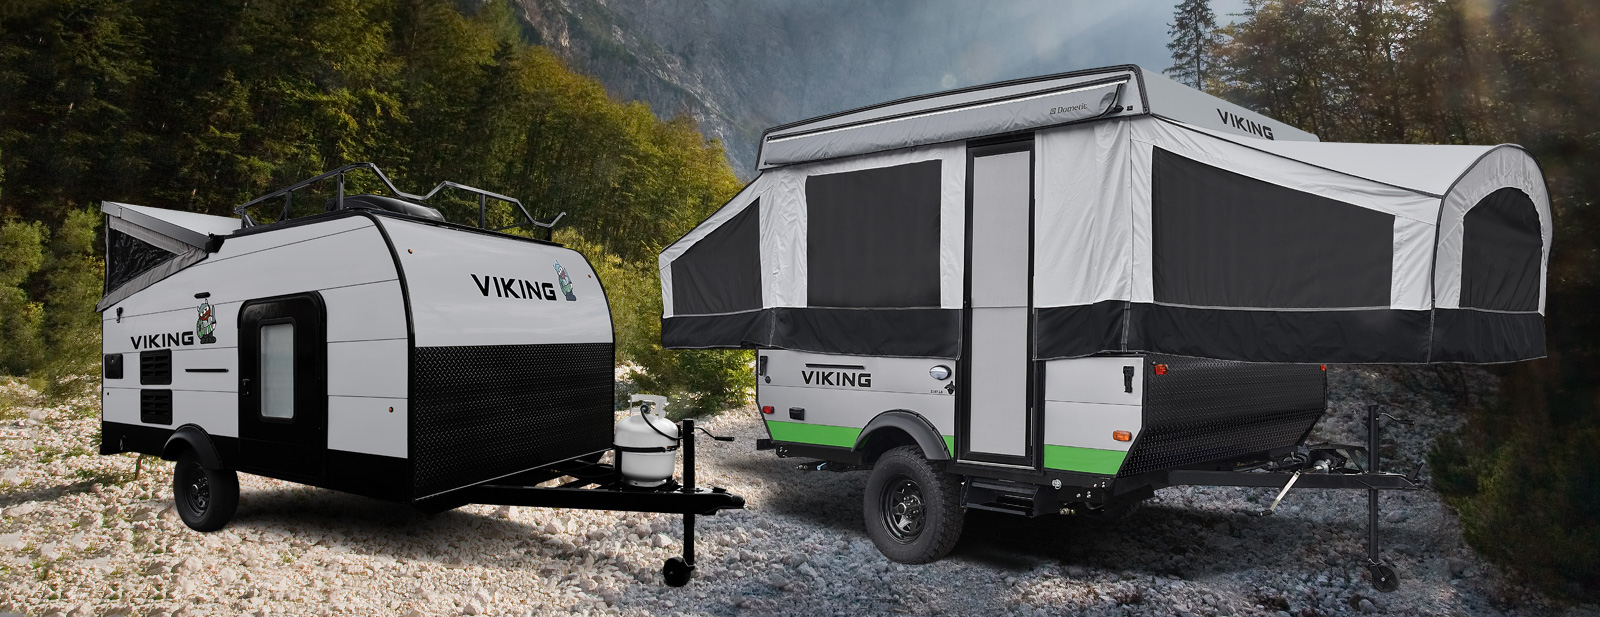 Viking Pop Up Campers By Coachmen Rv, Pop Up Trailer With Bathroom Canada